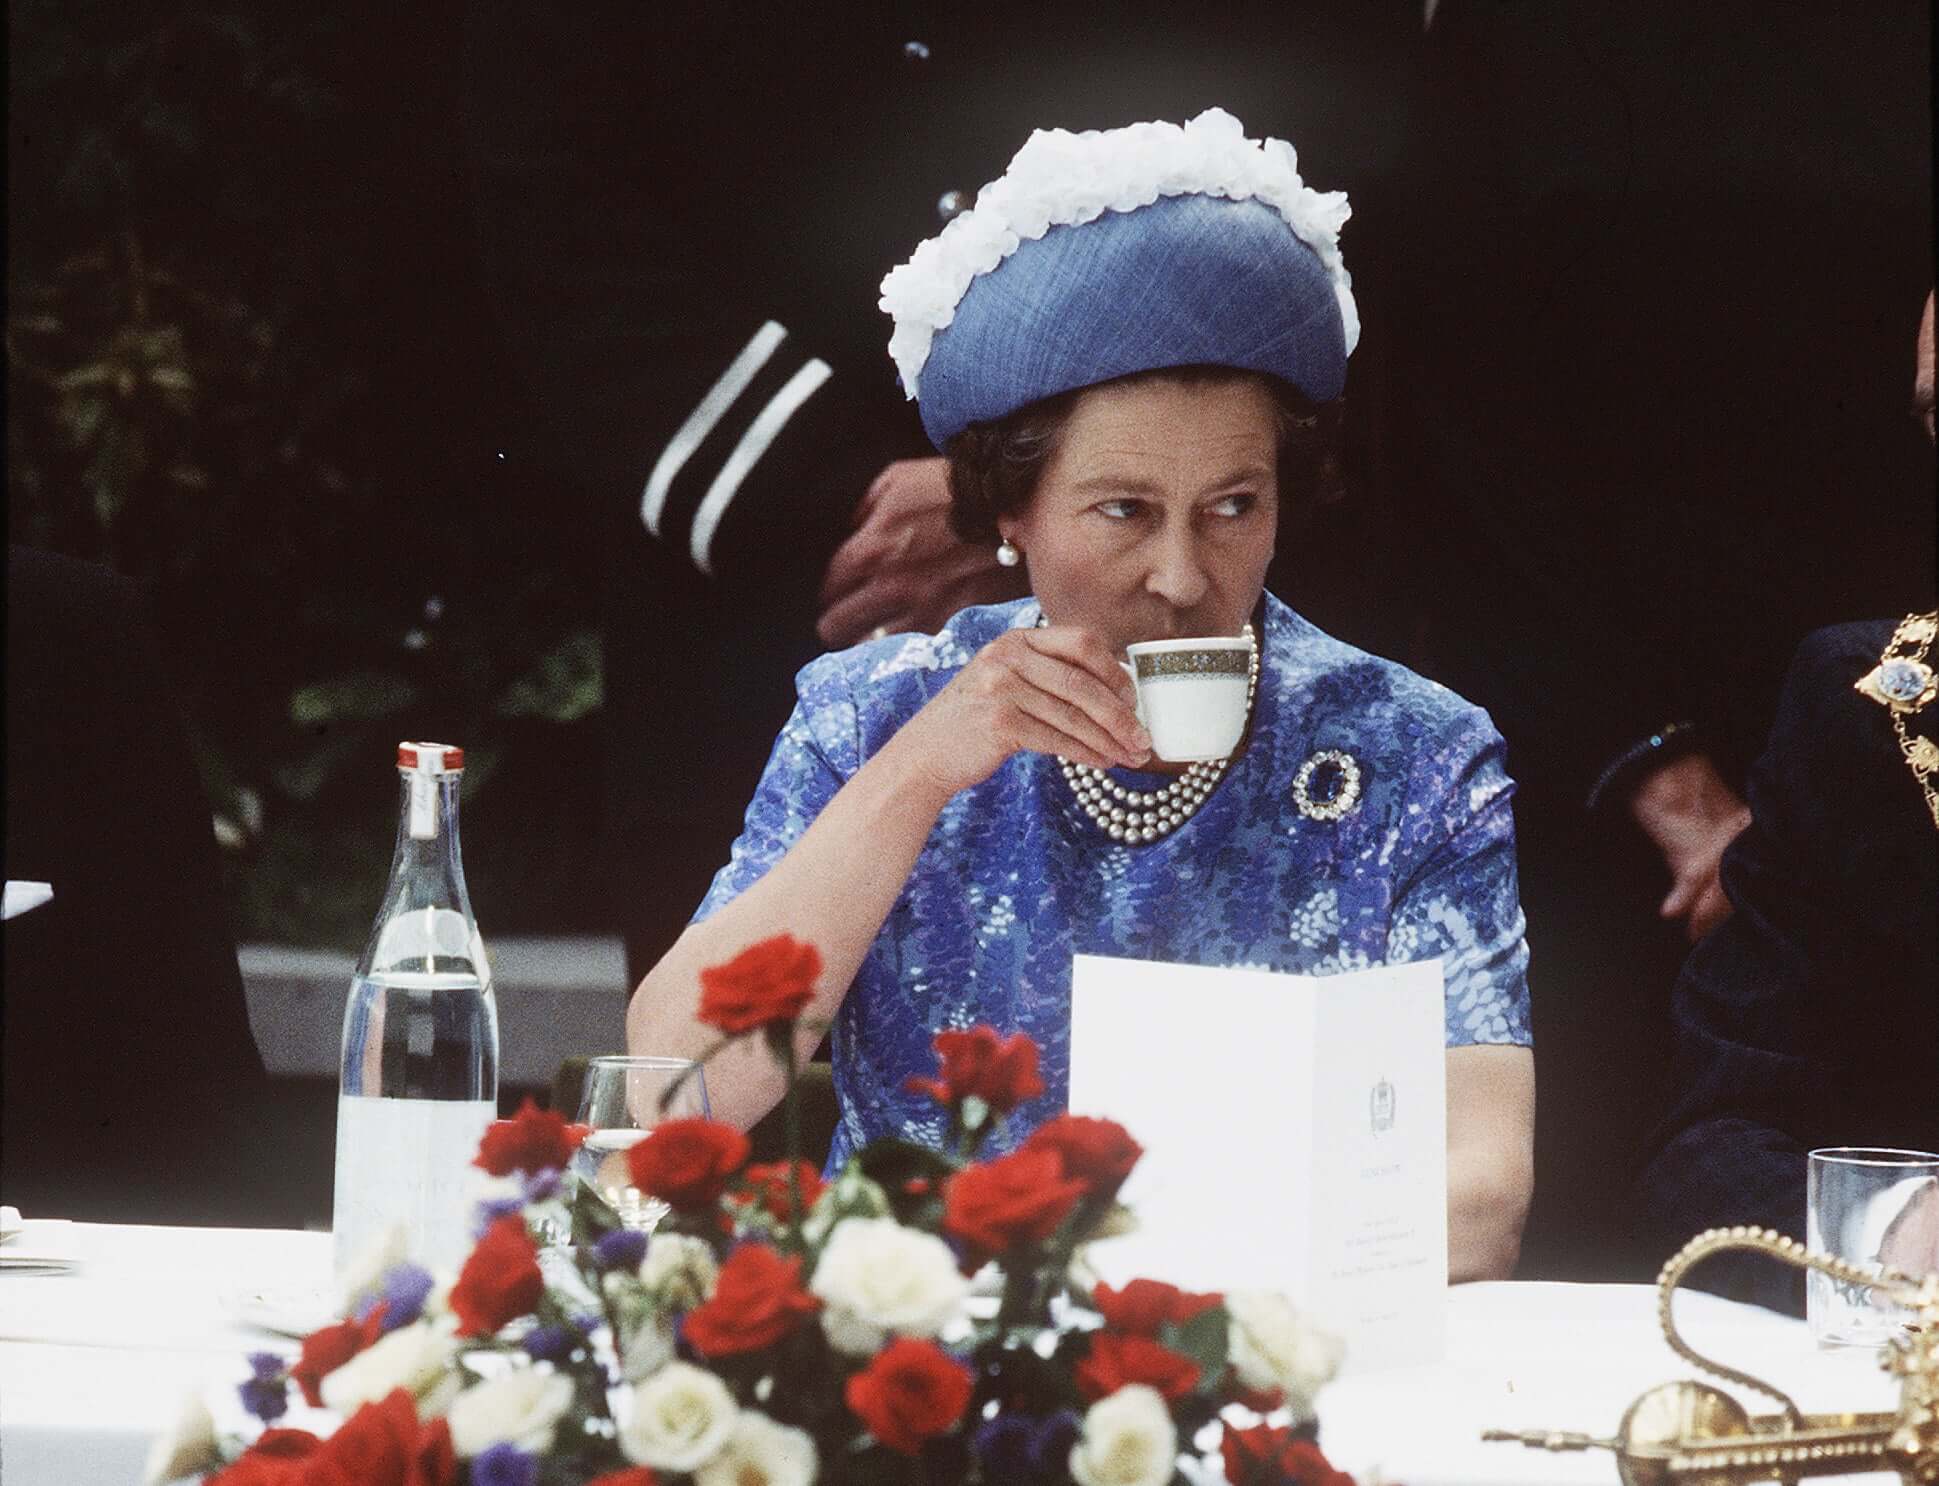 Queen Elizabeth, dressed in blue, sips from a teacup